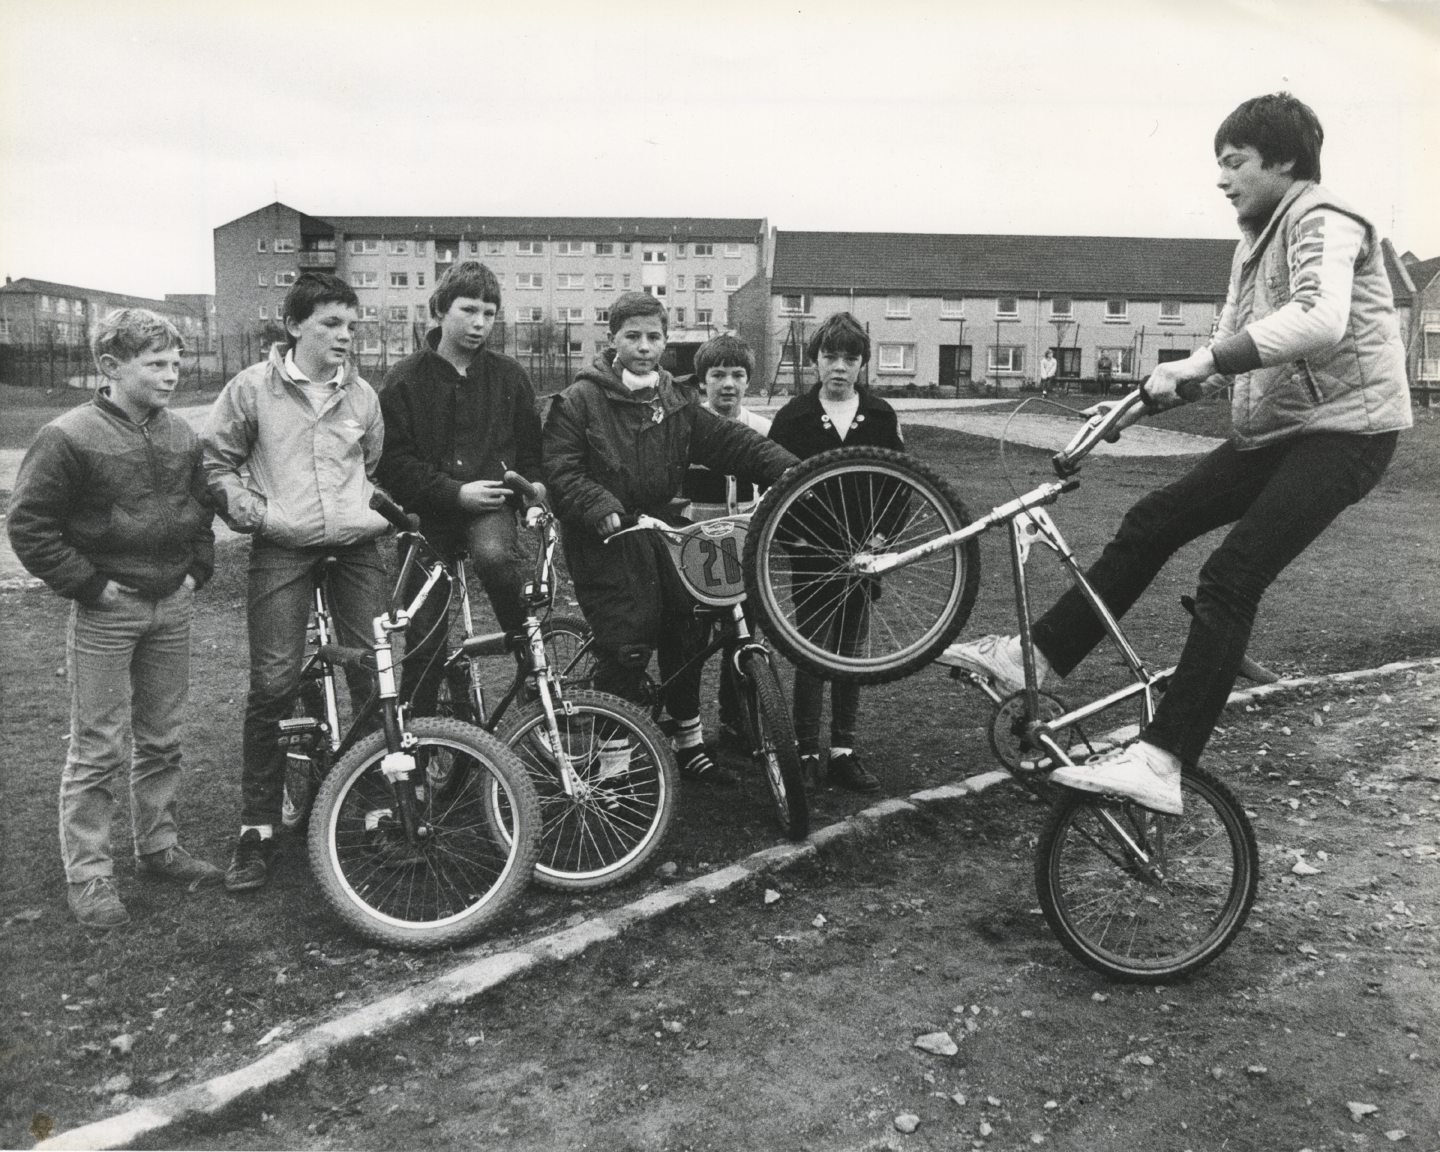 Fifteen-year-old Wayne Christie shows his mates his latest trick on the BMX bike at the Tillydrone track in 1983